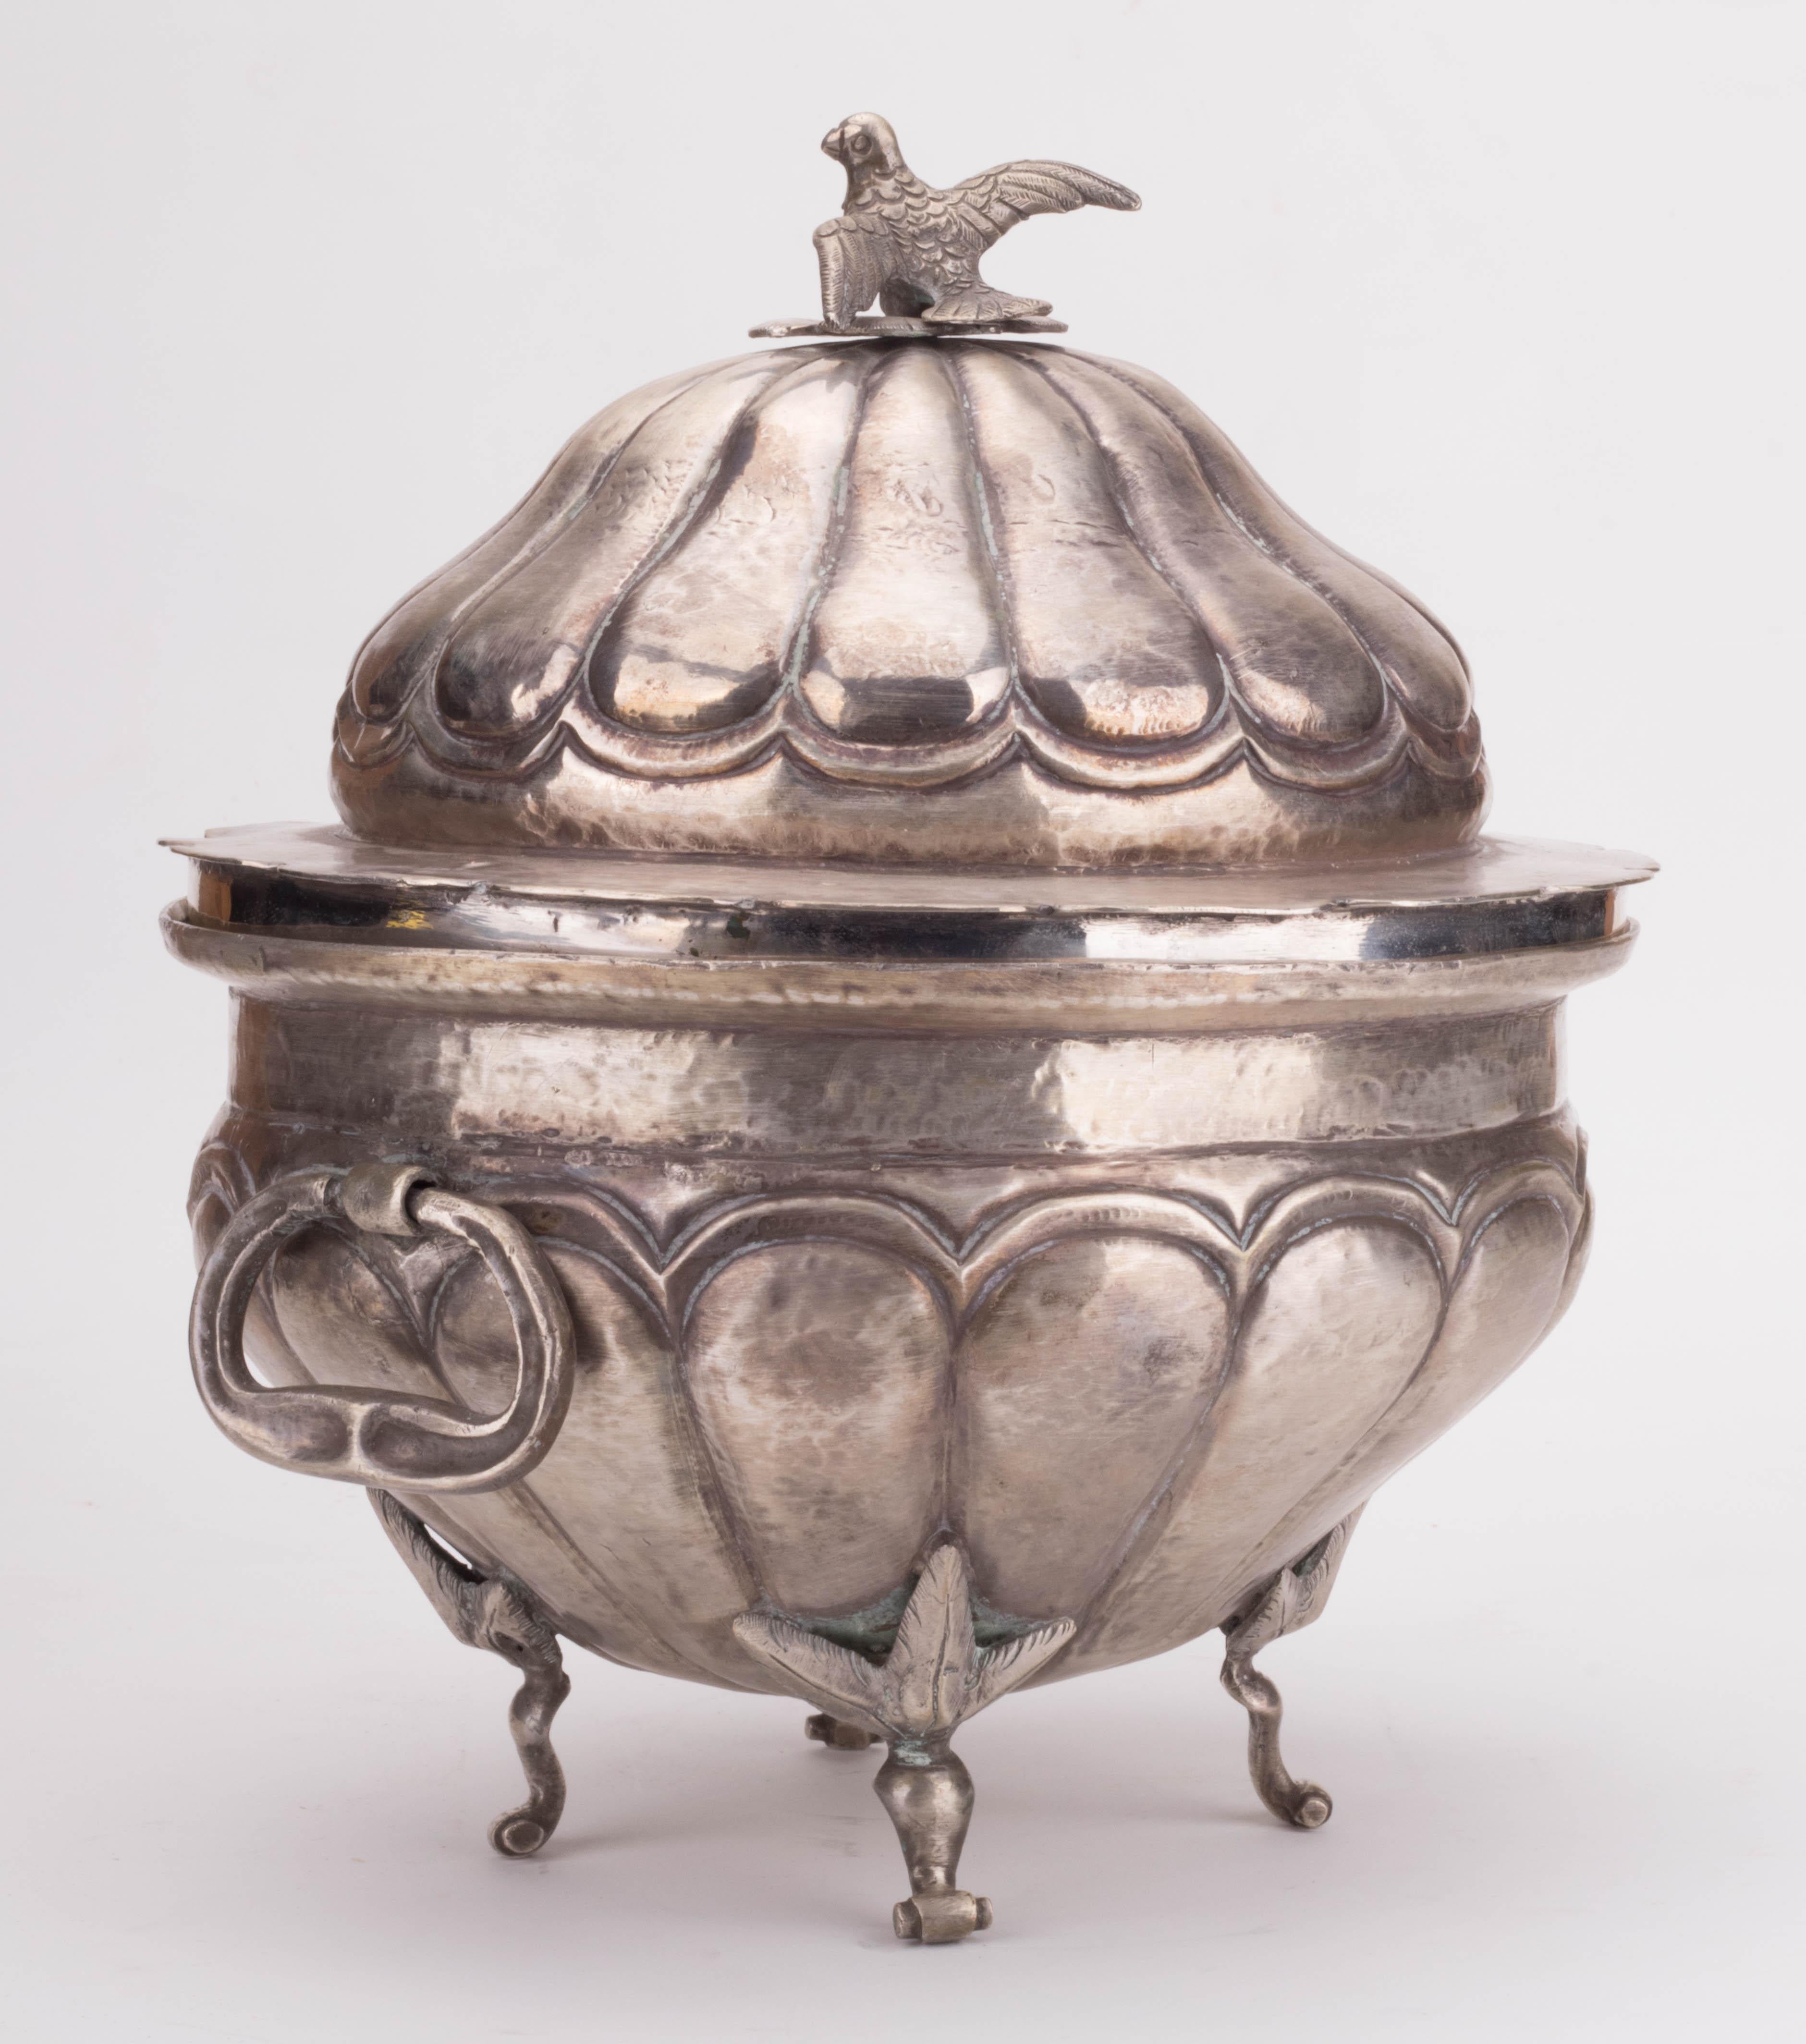 18th Century 1780s Colonial Peruvian Tureen with Side Handles and Dove Shaped Knob on Lid